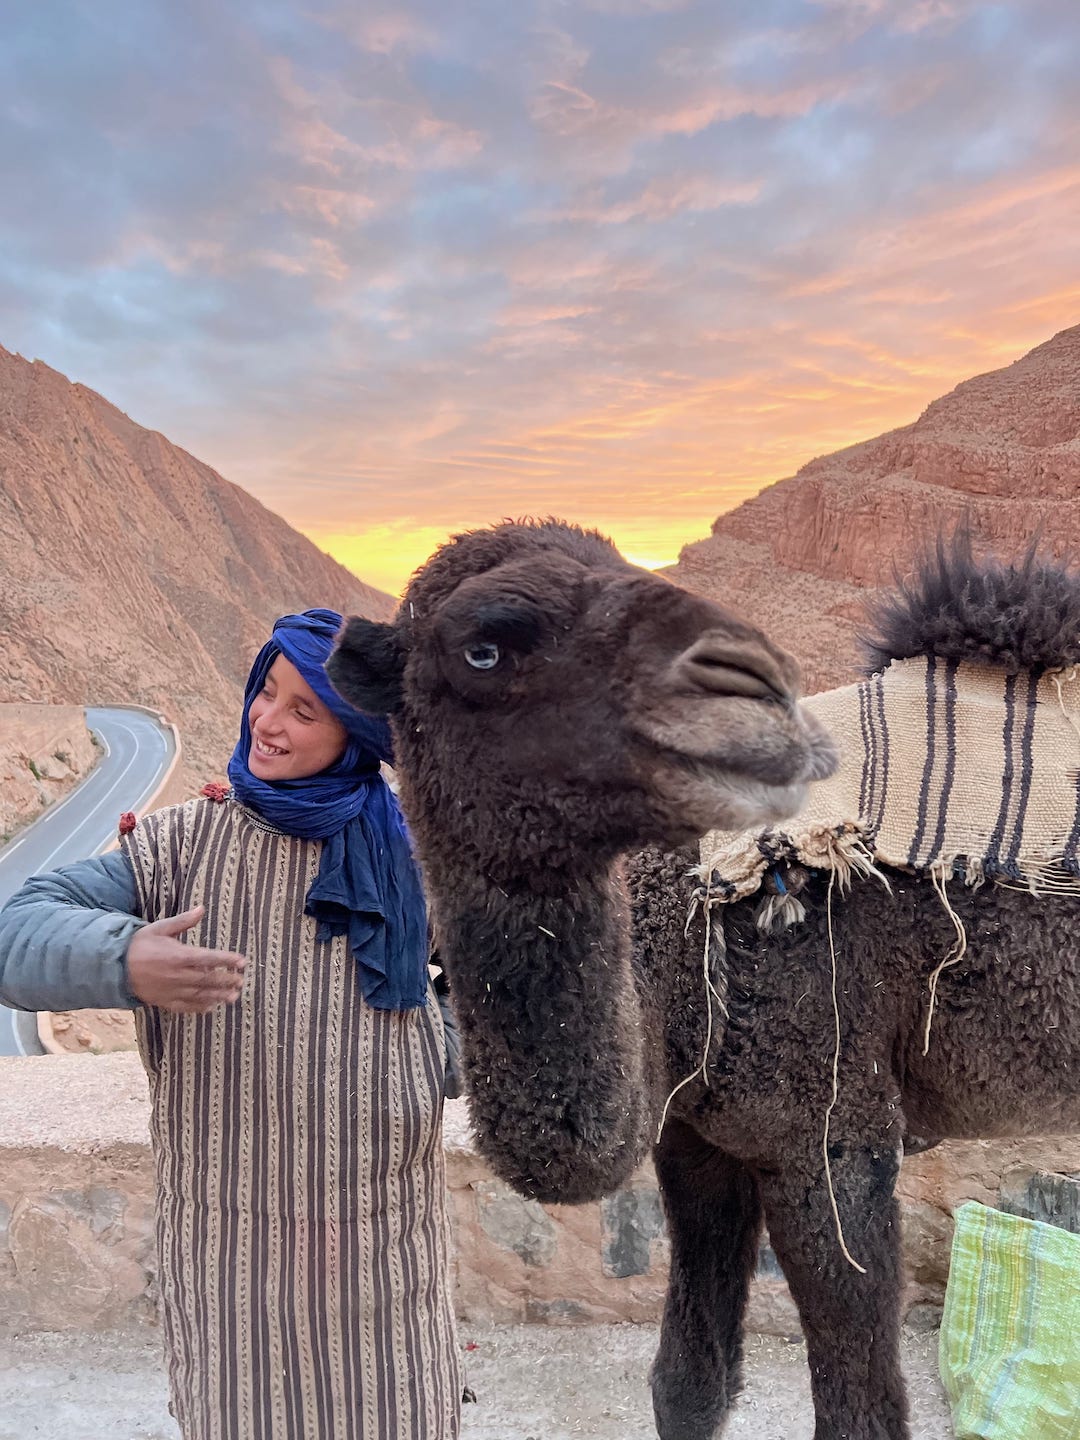 young boy in a blue turban with a young camel at sunset in dades gorge morocco